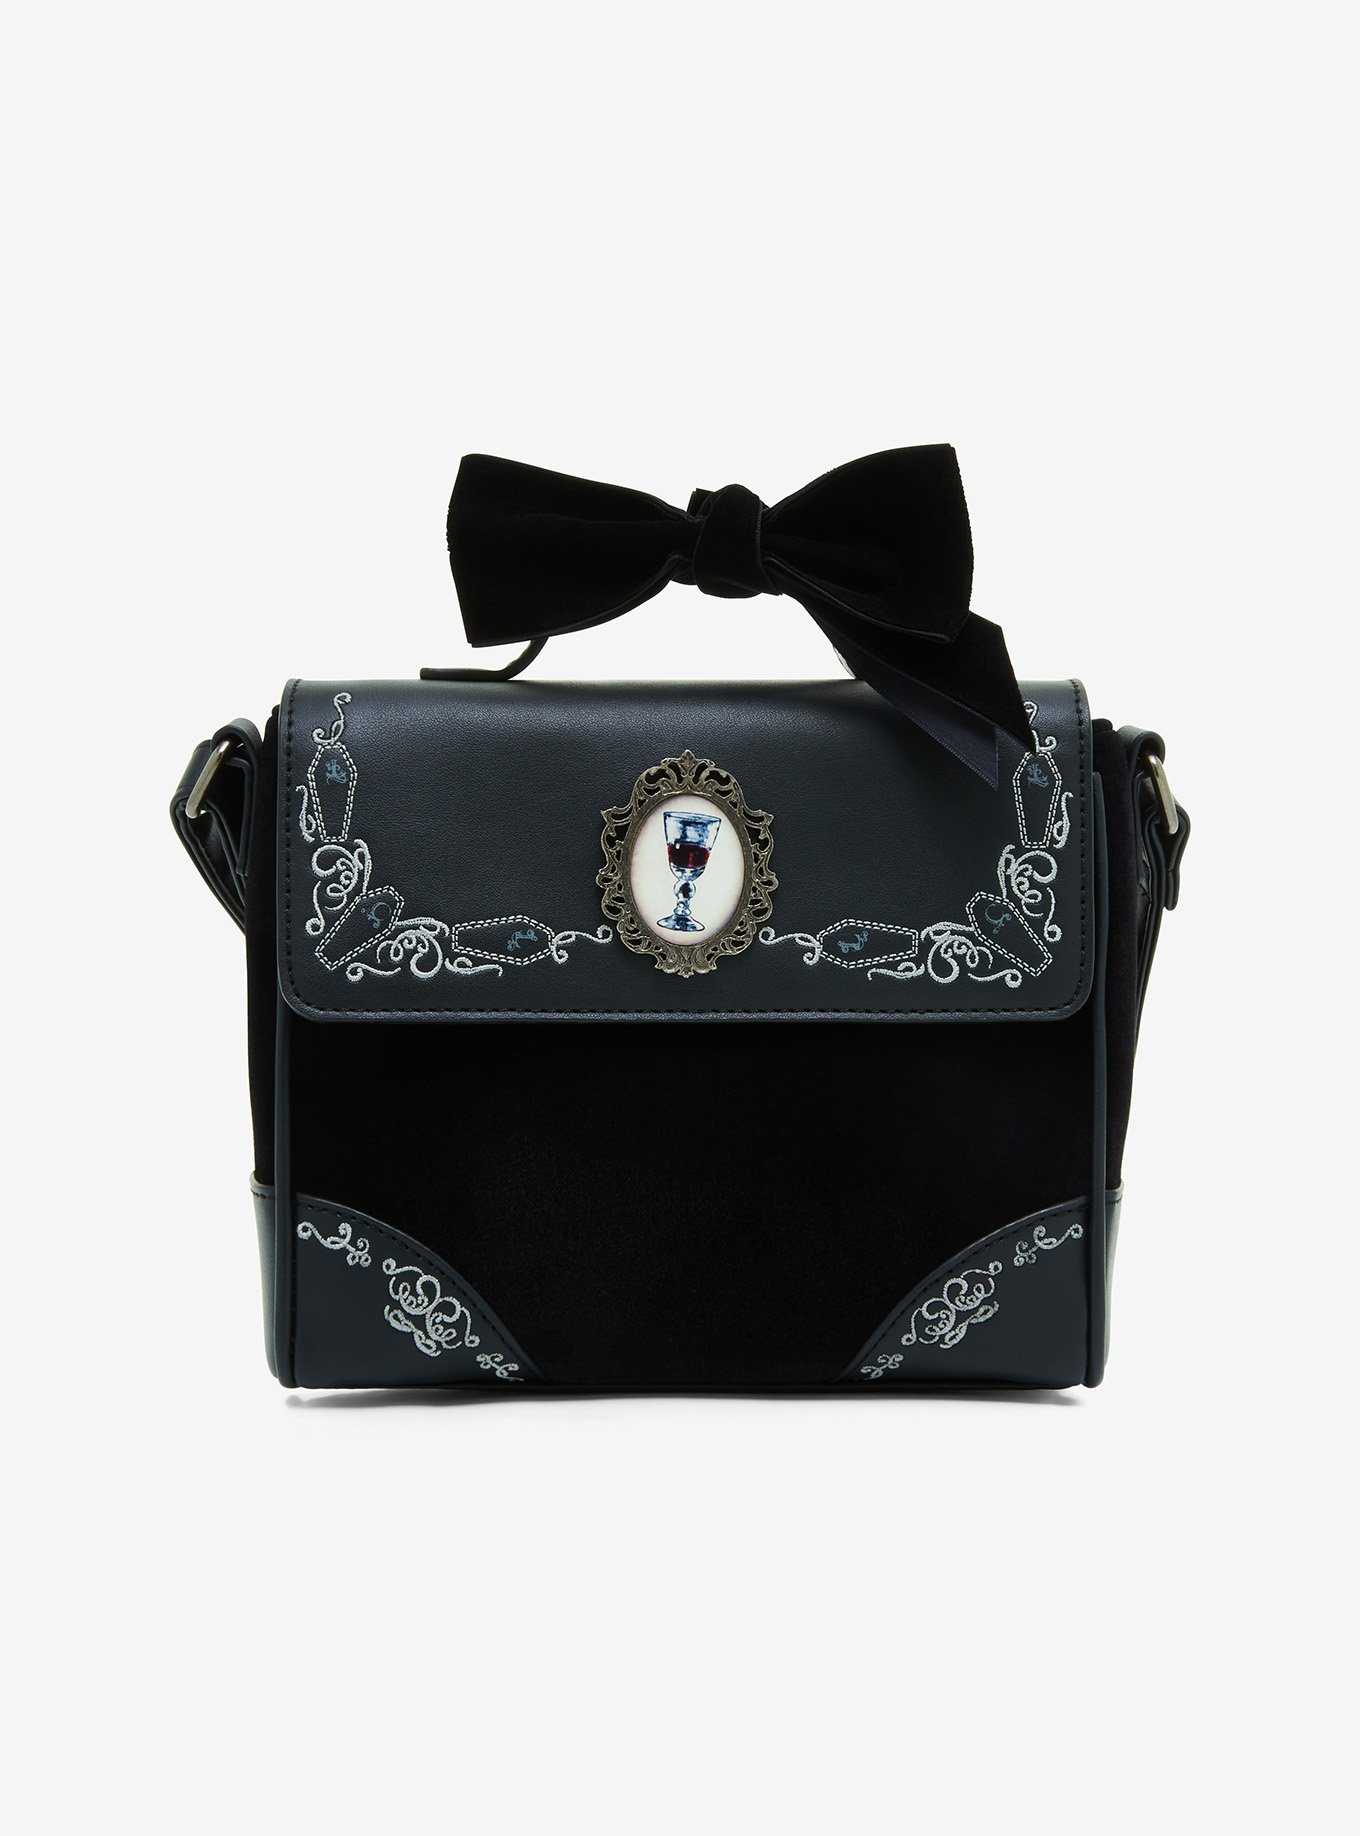 Her Universe Interview With The Vampire Gothic Filigree Crossbody Bag, , hi-res